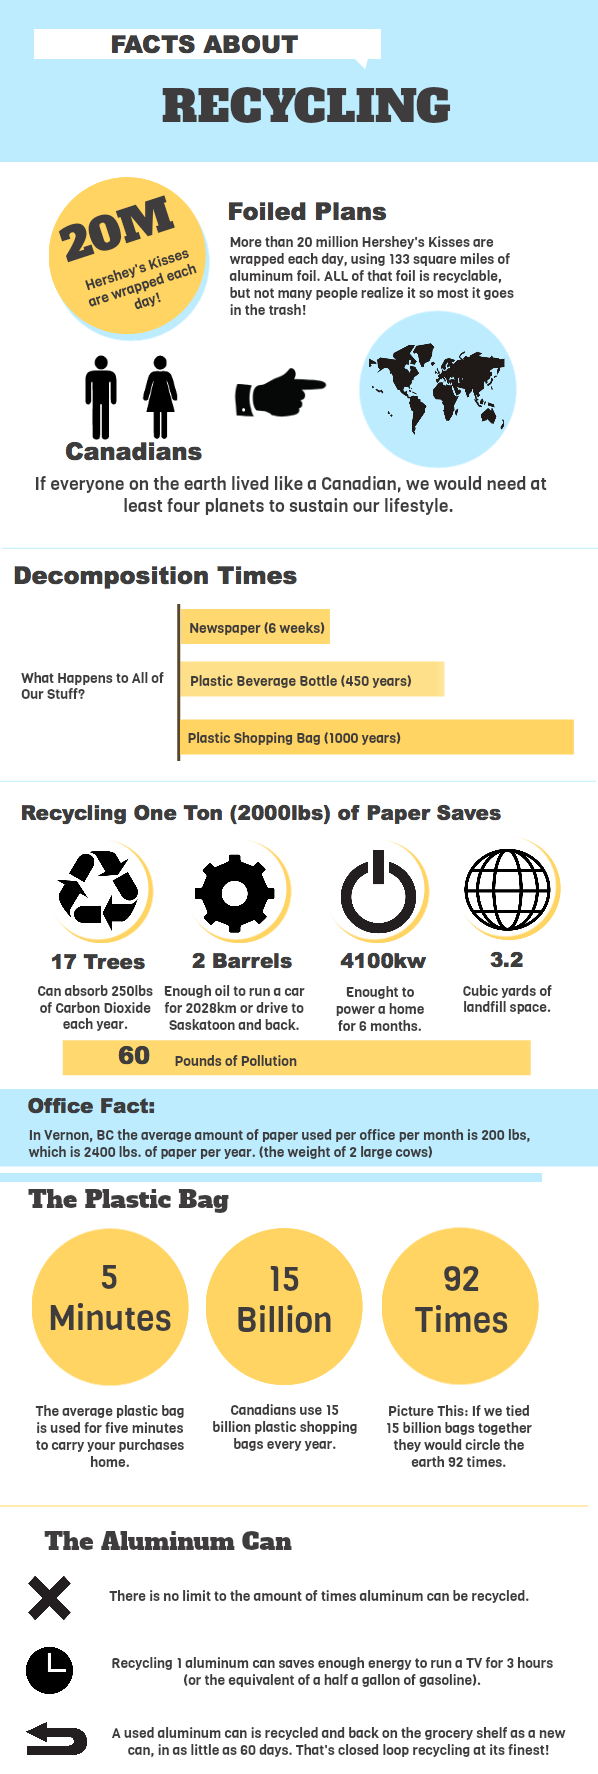 Facts_About_Recycling_Infographic